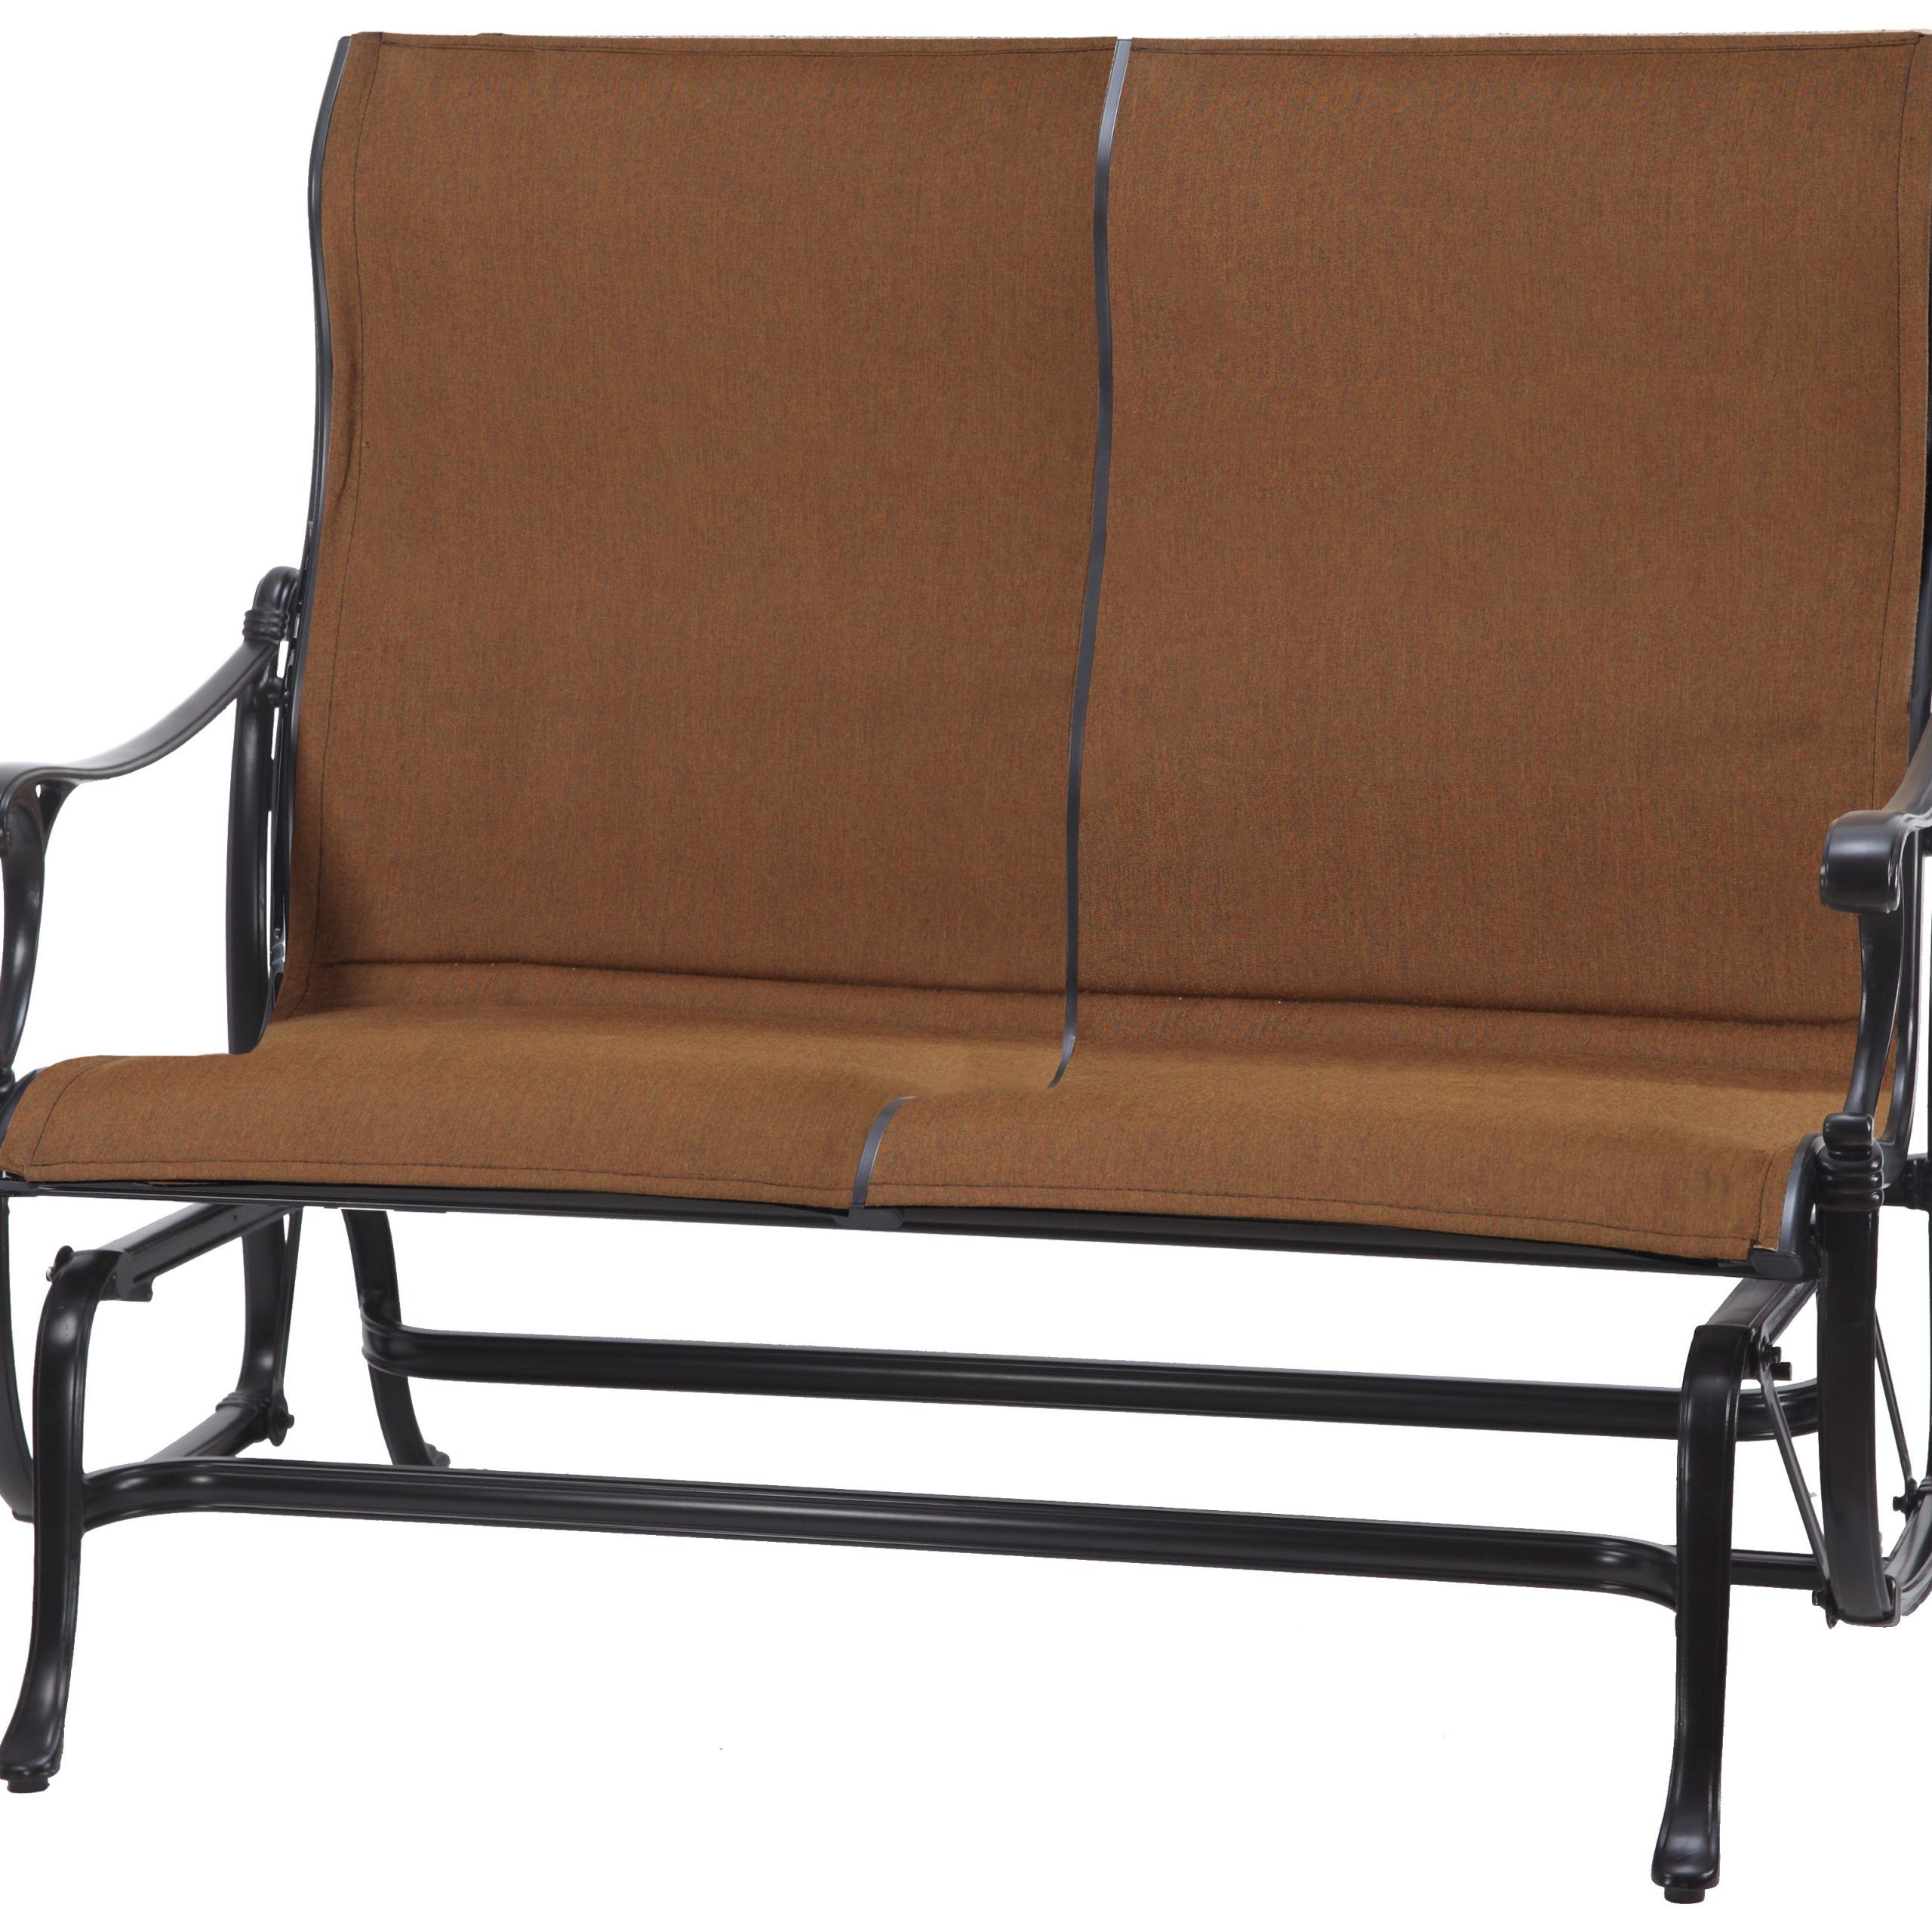 Gensun Michigan Padded Sling Cast Aluminum High Back Loveseat Glider Intended For Padded Sling Loveseats With Cushions (View 13 of 25)